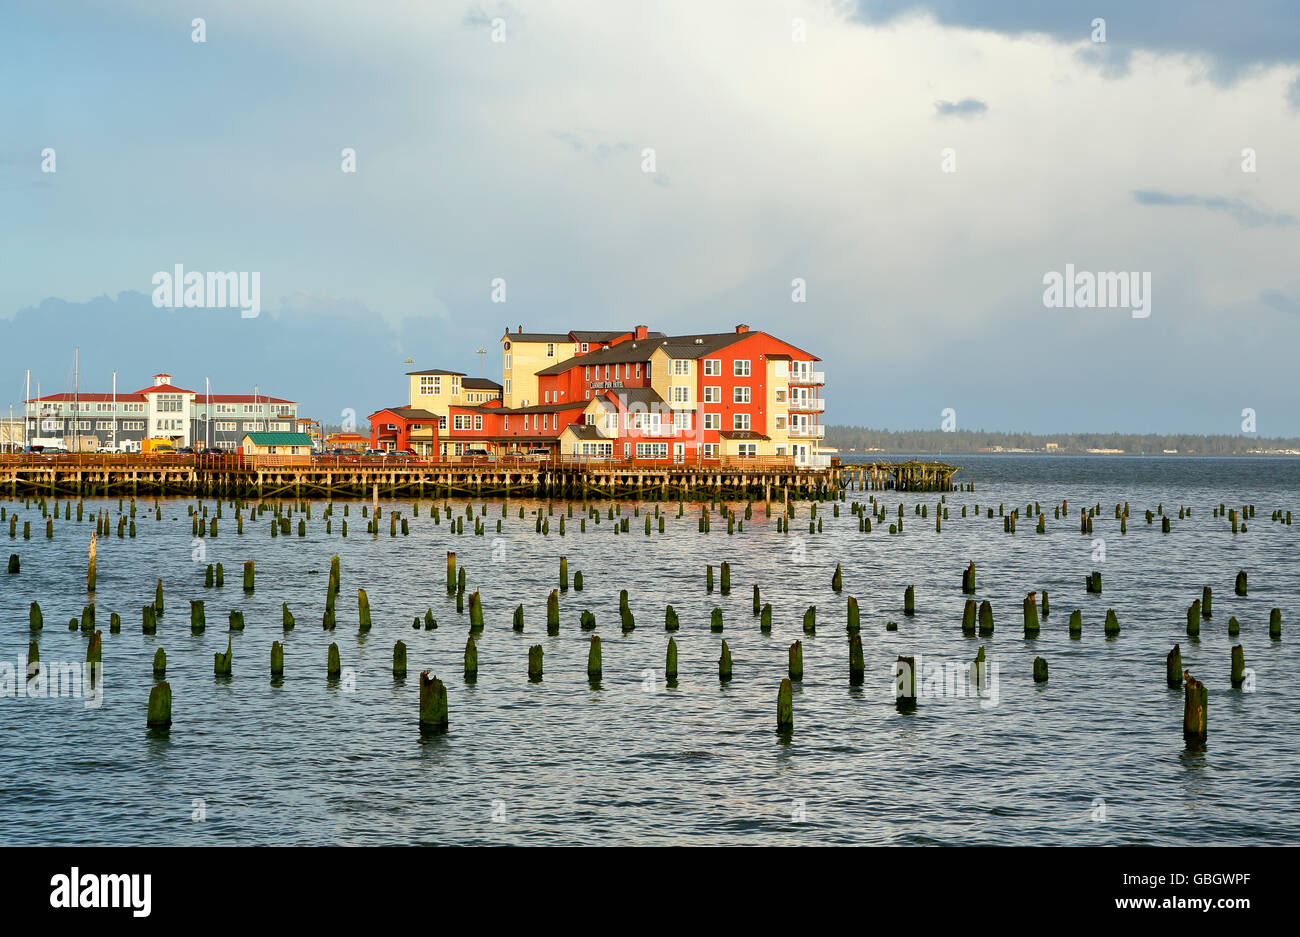 Buildings on Cannery Pier, Columbia River and wood pylons, Astoria, Oregon USA Stock Photo